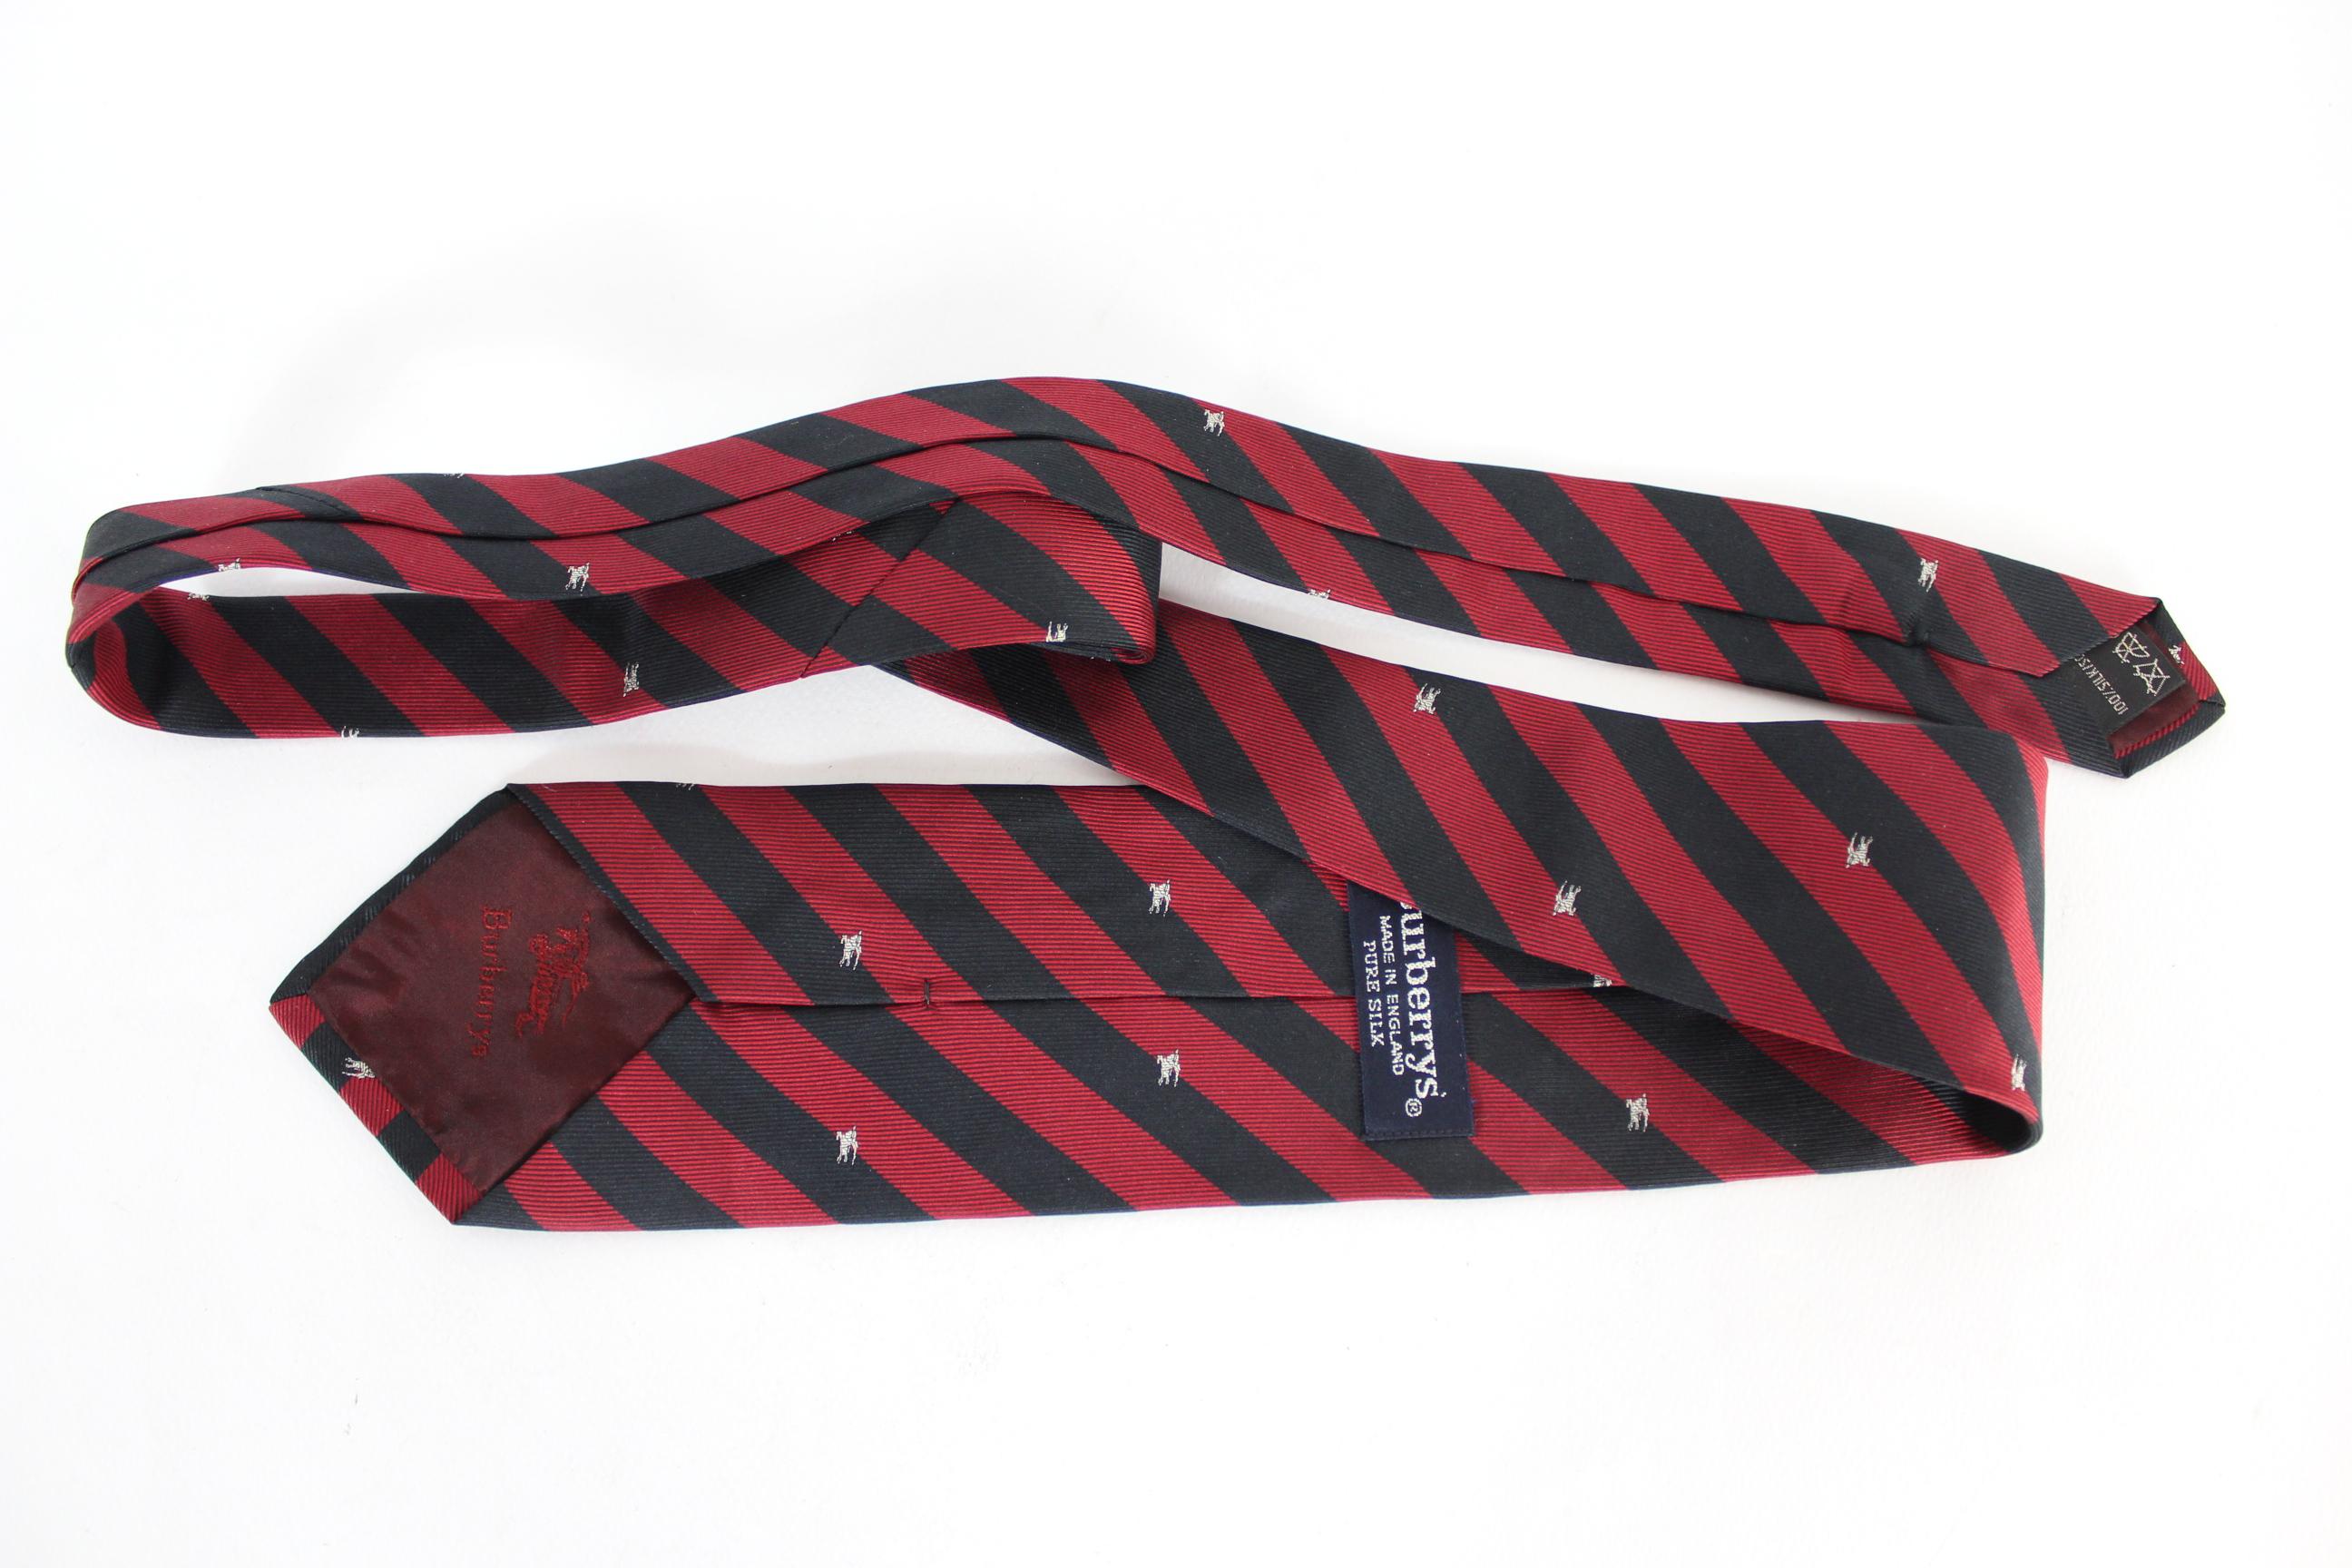 Burberry classic 80s tie. Color red and blue in rows, 100% silk. Made in England. Excellent vintage condition.

Length: 145 cm
Width: 9 cm